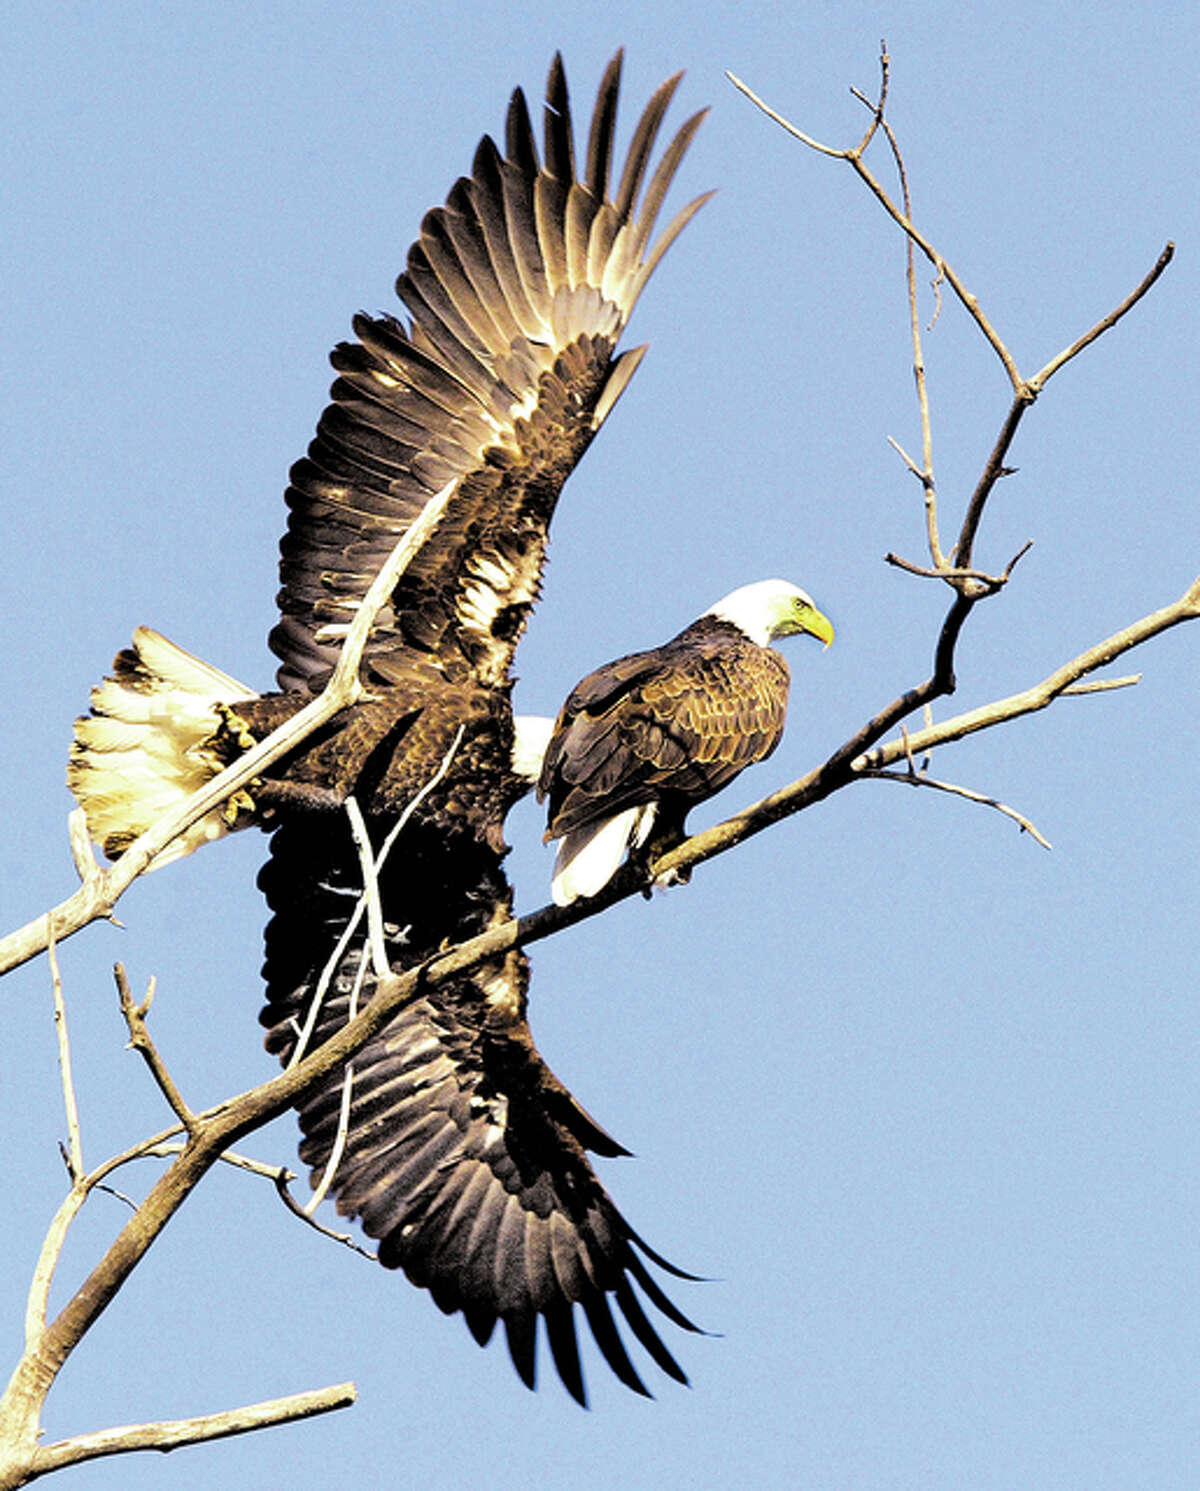 A pair of eagles, one already taking flight, keep a close eye on the Mississippi River for a fish breakfast in this file photo.